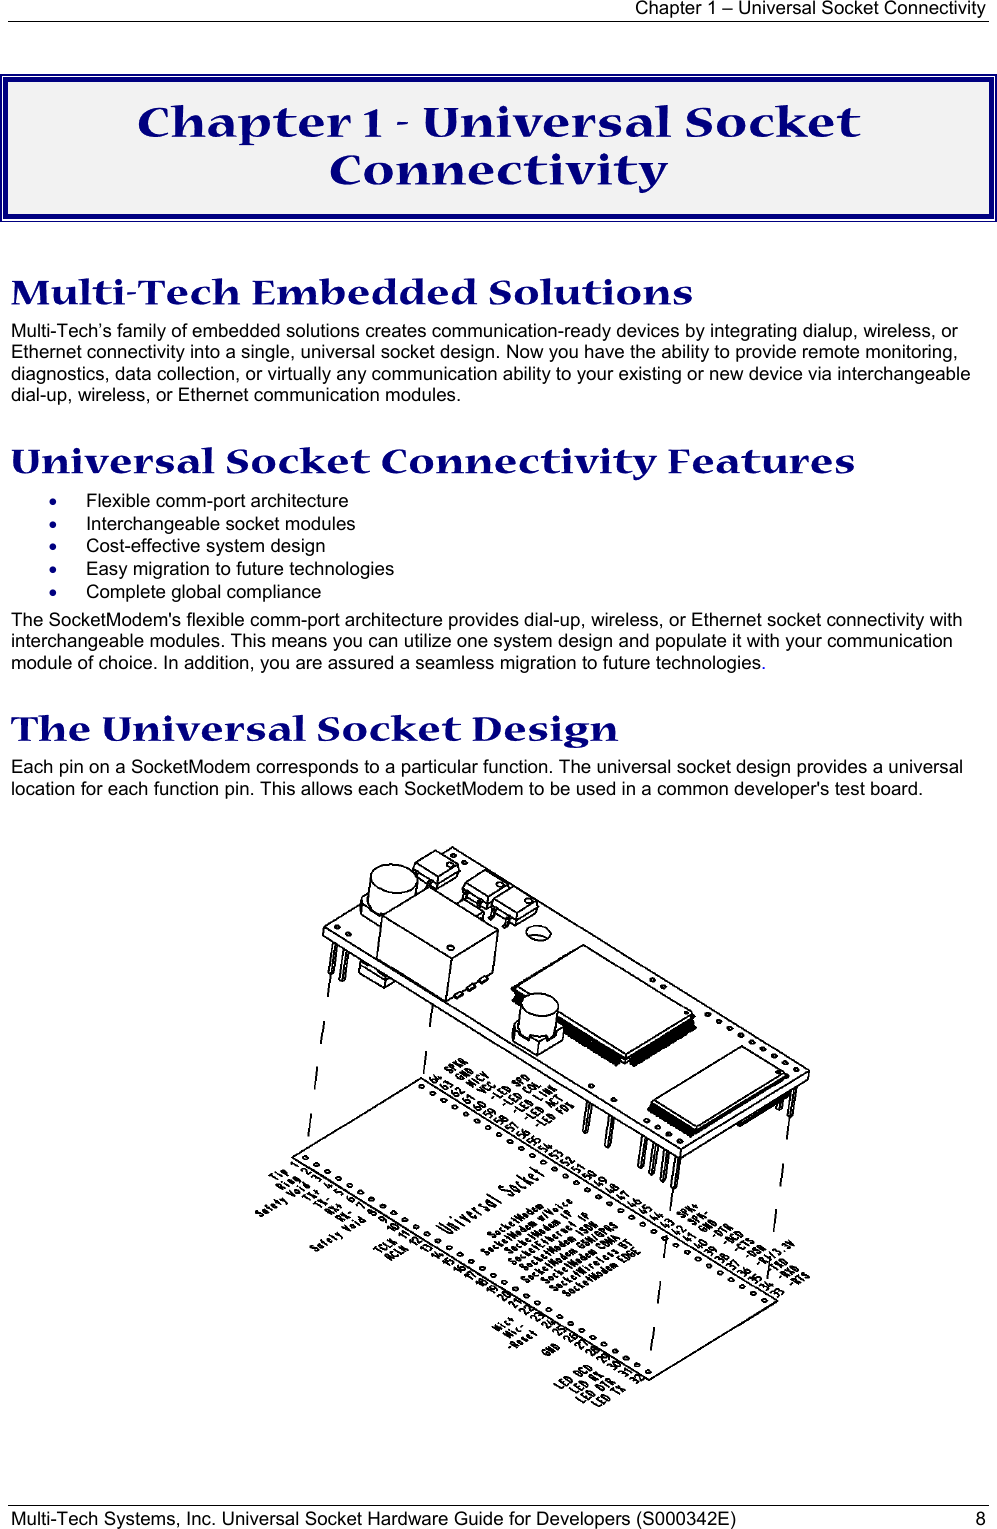 Chapter 1 – Universal Socket Connectivity Multi-Tech Systems, Inc. Universal Socket Hardware Guide for Developers (S000342E)  8  Chapter 1 - Universal Socket Connectivity  Multi-Tech Embedded Solutions Multi-Tech’s family of embedded solutions creates communication-ready devices by integrating dialup, wireless, or Ethernet connectivity into a single, universal socket design. Now you have the ability to provide remote monitoring, diagnostics, data collection, or virtually any communication ability to your existing or new device via interchangeable dial-up, wireless, or Ethernet communication modules.  Universal Socket Connectivity Features • Flexible comm-port architecture  • Interchangeable socket modules • Cost-effective system design • Easy migration to future technologies • Complete global compliance The SocketModem&apos;s flexible comm-port architecture provides dial-up, wireless, or Ethernet socket connectivity with interchangeable modules. This means you can utilize one system design and populate it with your communication module of choice. In addition, you are assured a seamless migration to future technologies. The Universal Socket Design  Each pin on a SocketModem corresponds to a particular function. The universal socket design provides a universal location for each function pin. This allows each SocketModem to be used in a common developer&apos;s test board.     